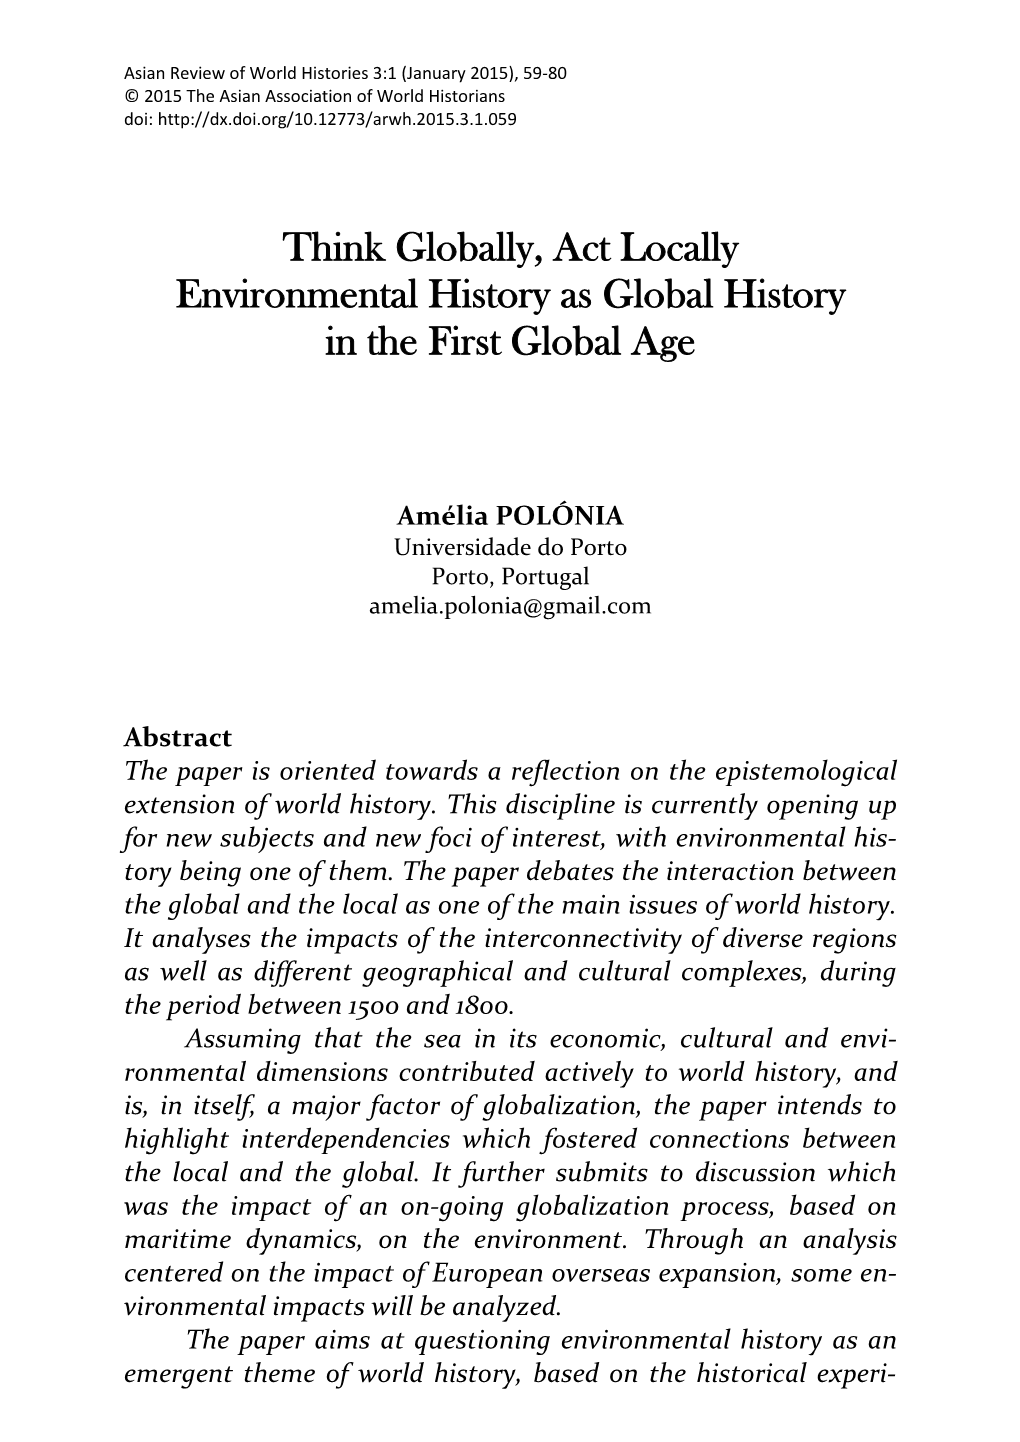 Think Globally, Act Locally Environmental History As Global History in the First Global Age